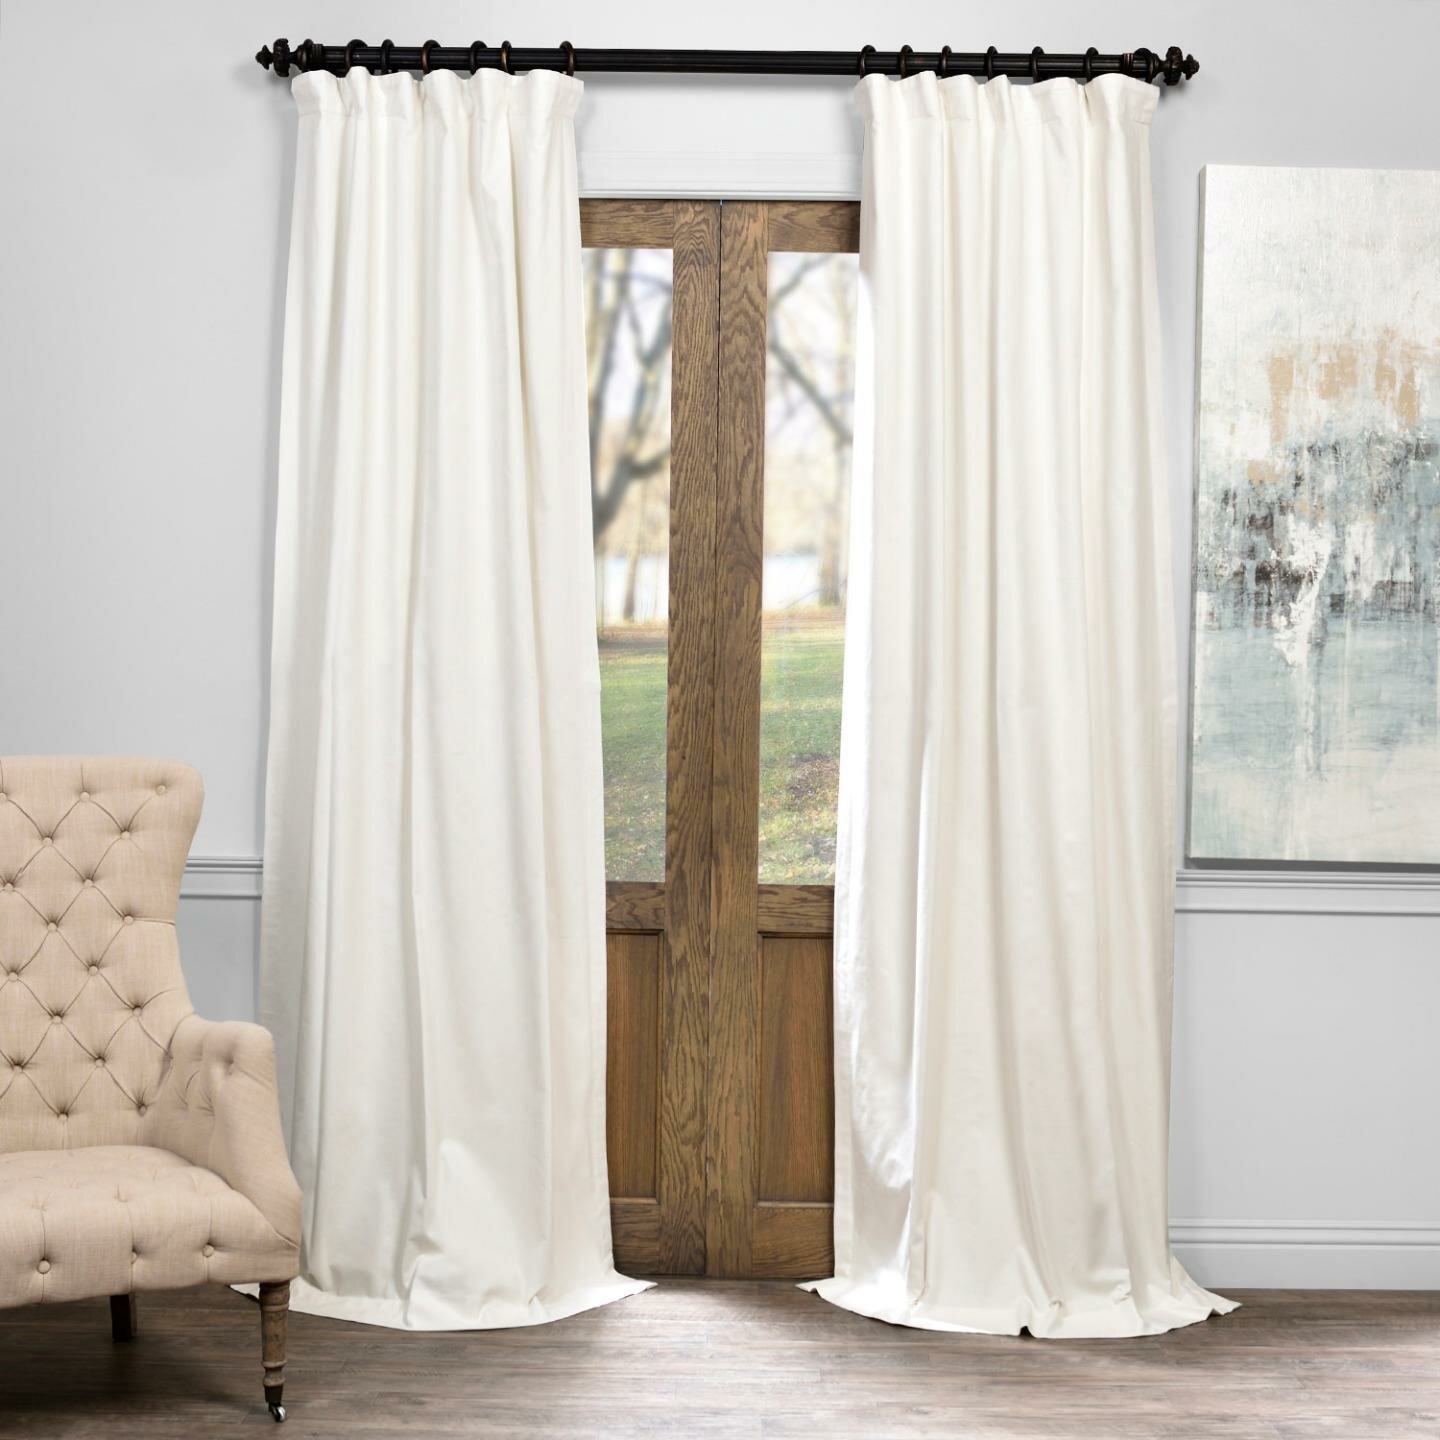 Canopy Bed Blackout Curtains - Homey Like Your Home